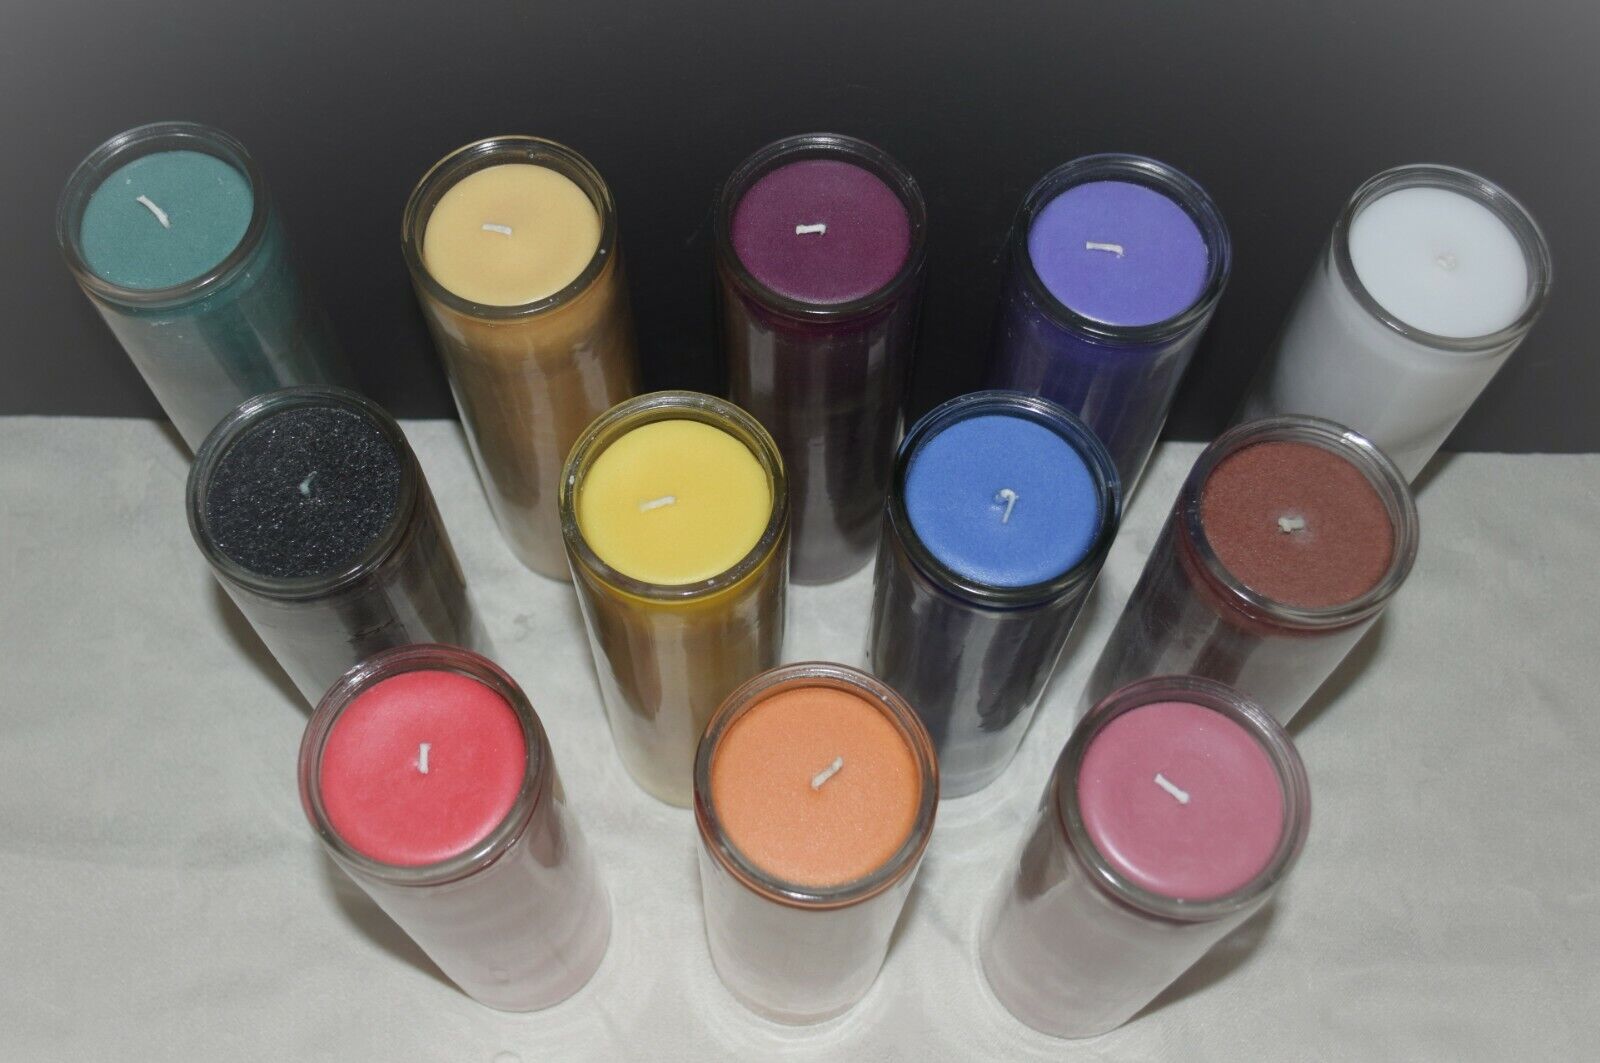 7 Day Candle Glass Blessings & Prayers Unscented Ritual church Candles 100hrs